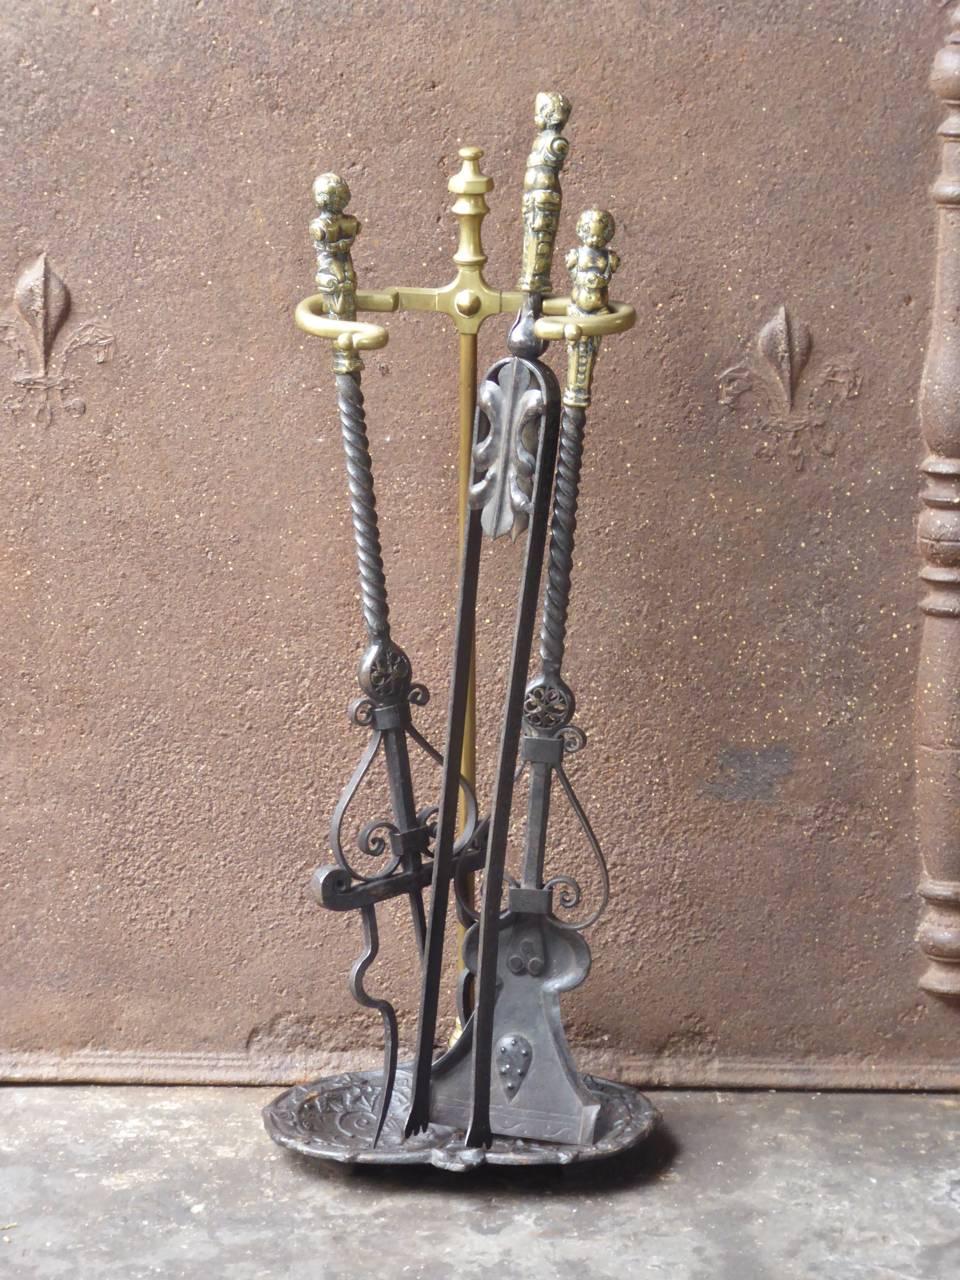 Early 20th century French Art Nouveau fireplace toolset - fire irons made of wrought iron, brass and bronze.

We have a unique and specialized collection of antique and used fireplace accessories consisting of more than 1000 listings at 1stdibs.